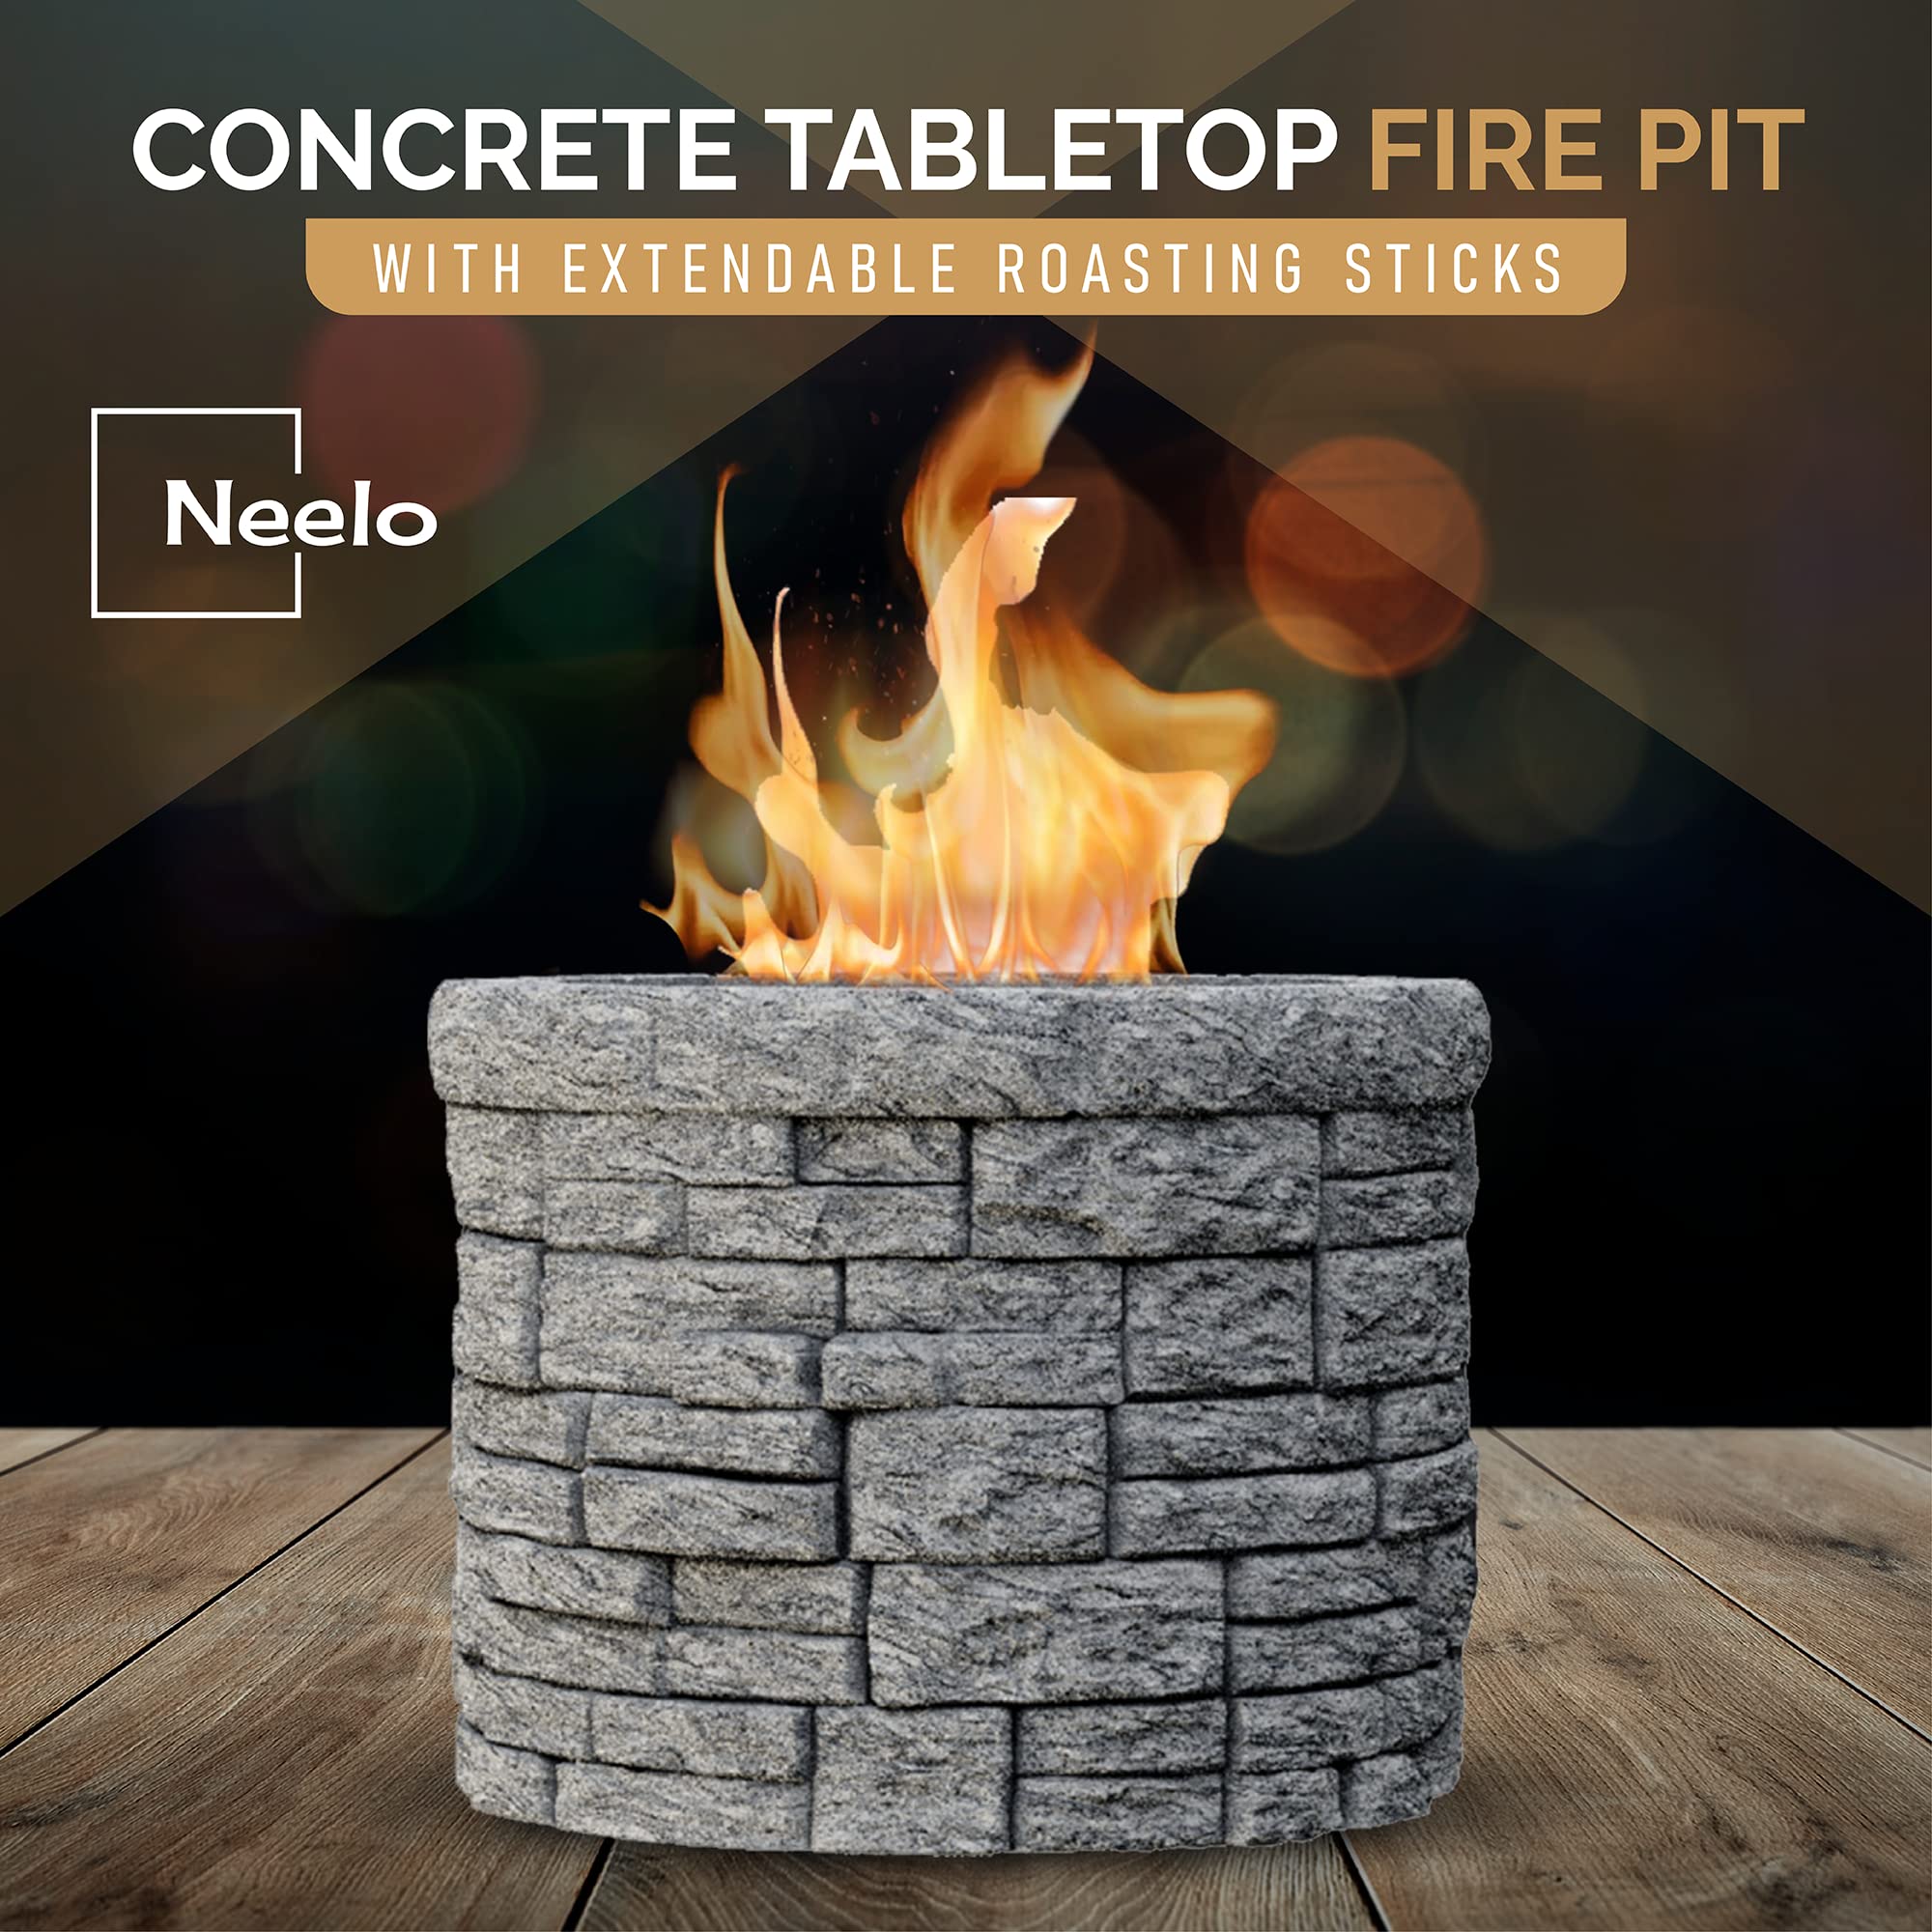 NEELO Concrete Tabletop S'mores Maker - Portable Smokeless Fire Pit Kit With Extendable Roasting Sticks for Indoor & Outdoor Patio Use